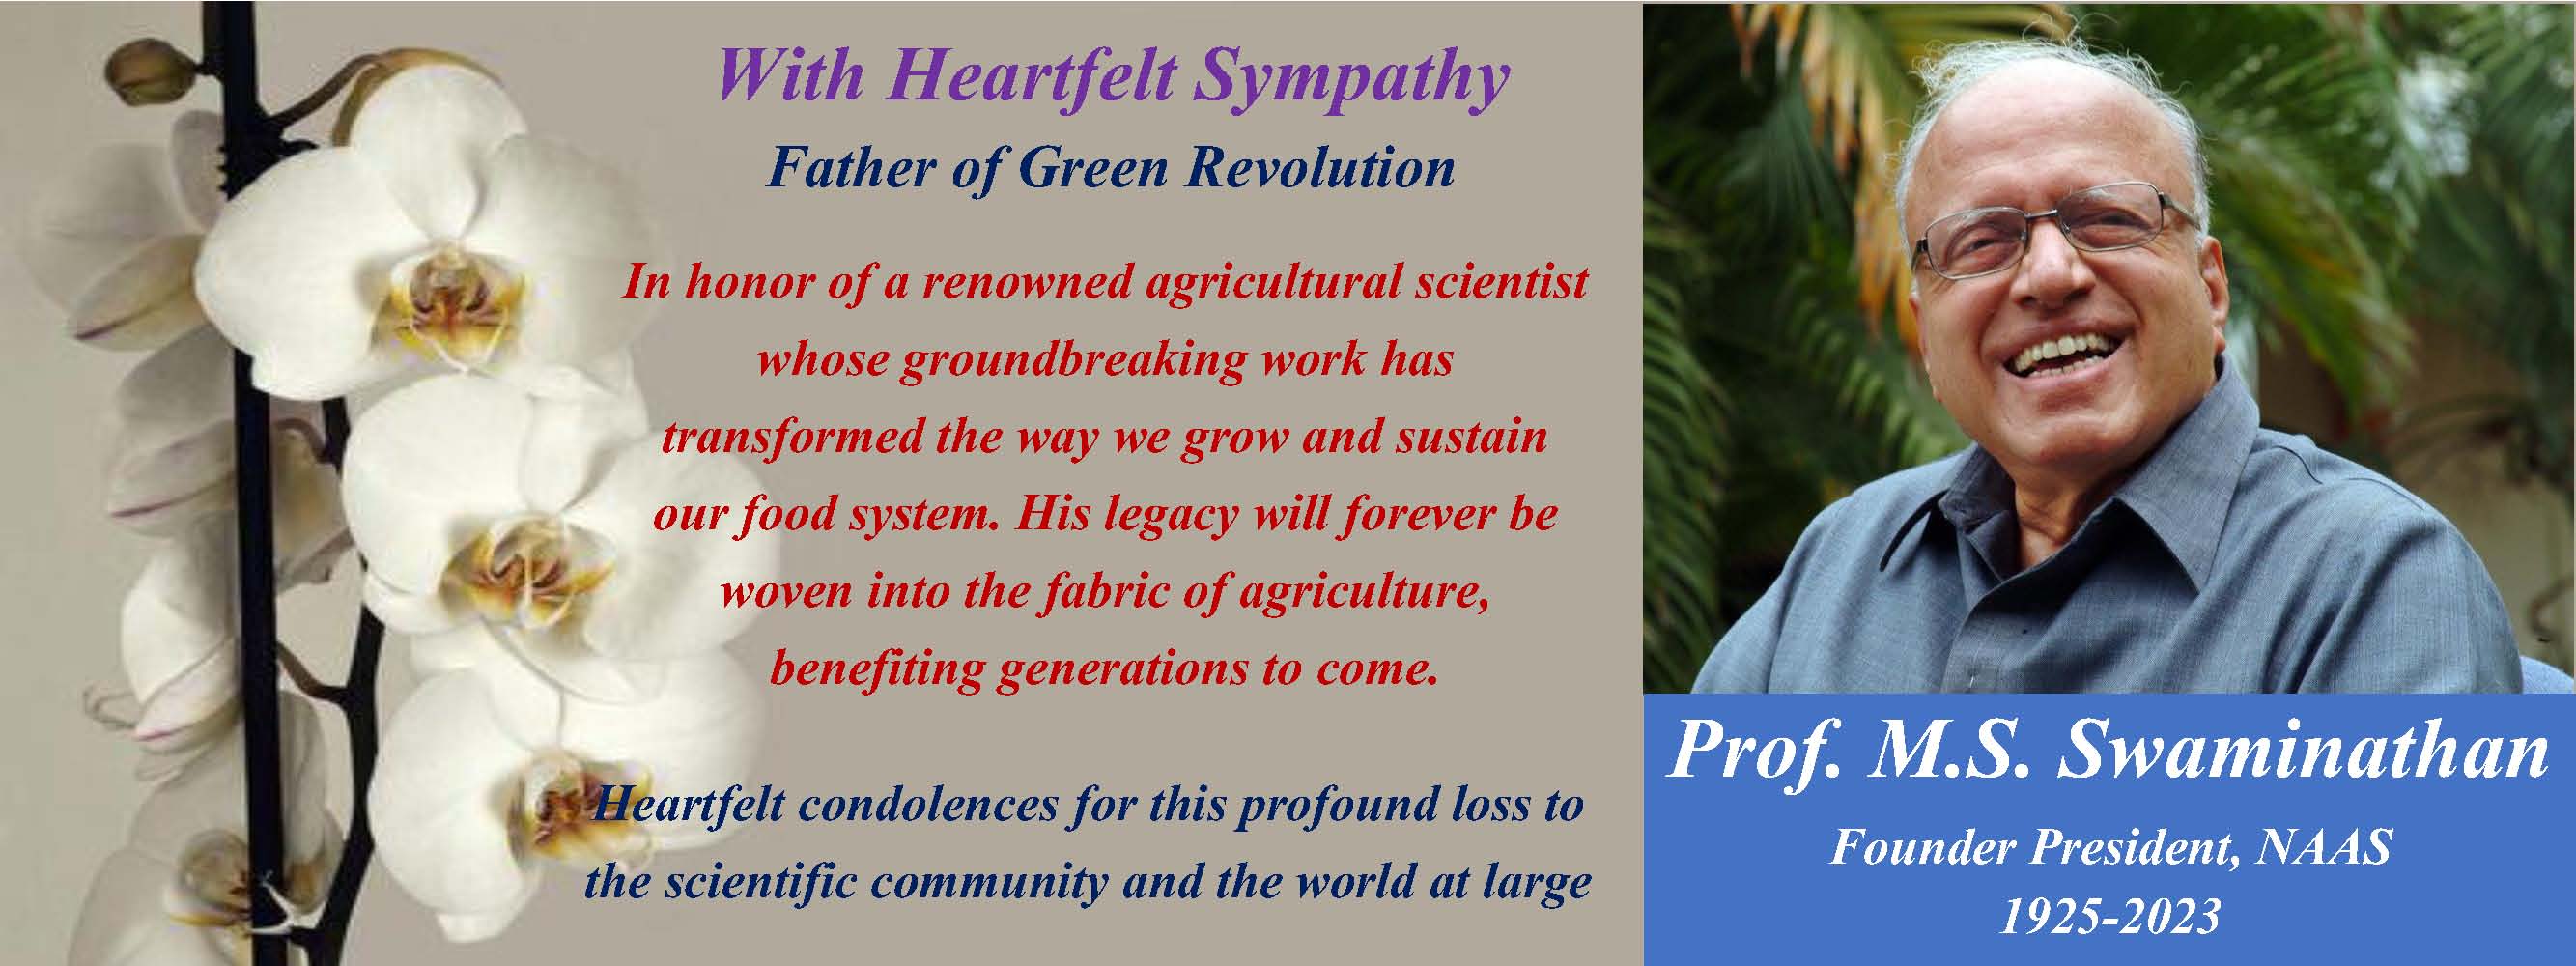 With Heartfelt Sympathy - Father of Green Revolution Prof. M.S. Swaminathan, Founder President of the Academy